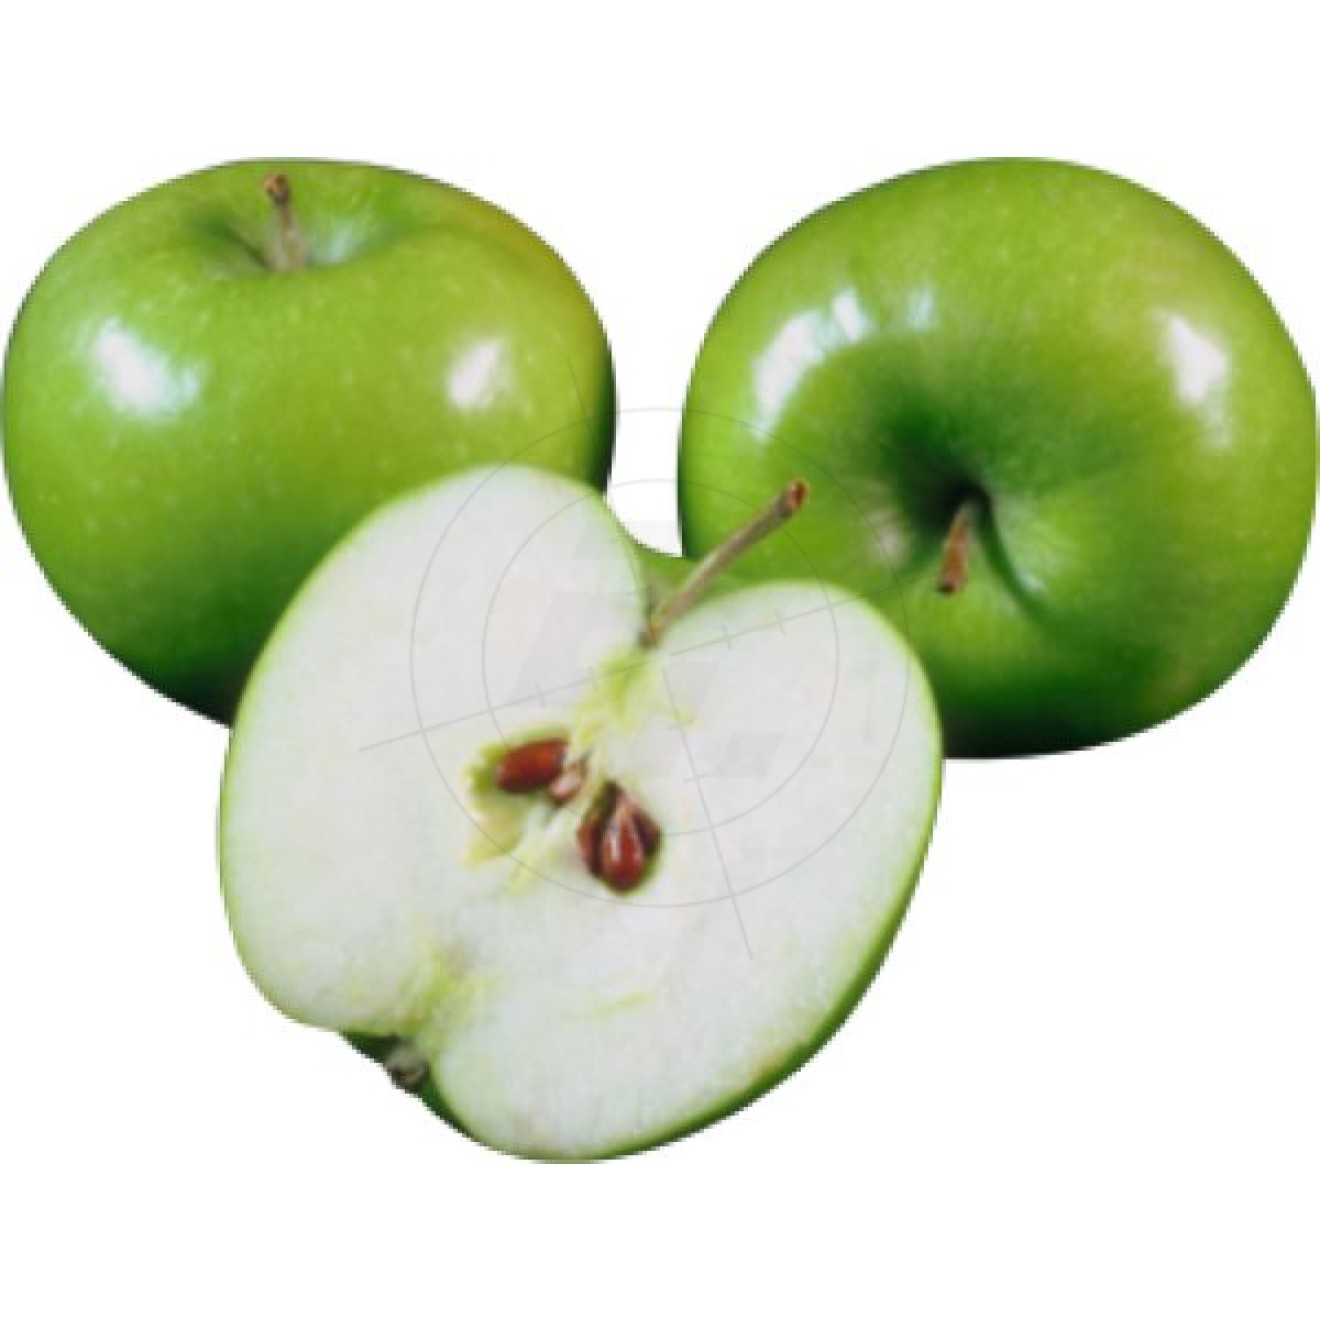 Stickers green apples, one halved